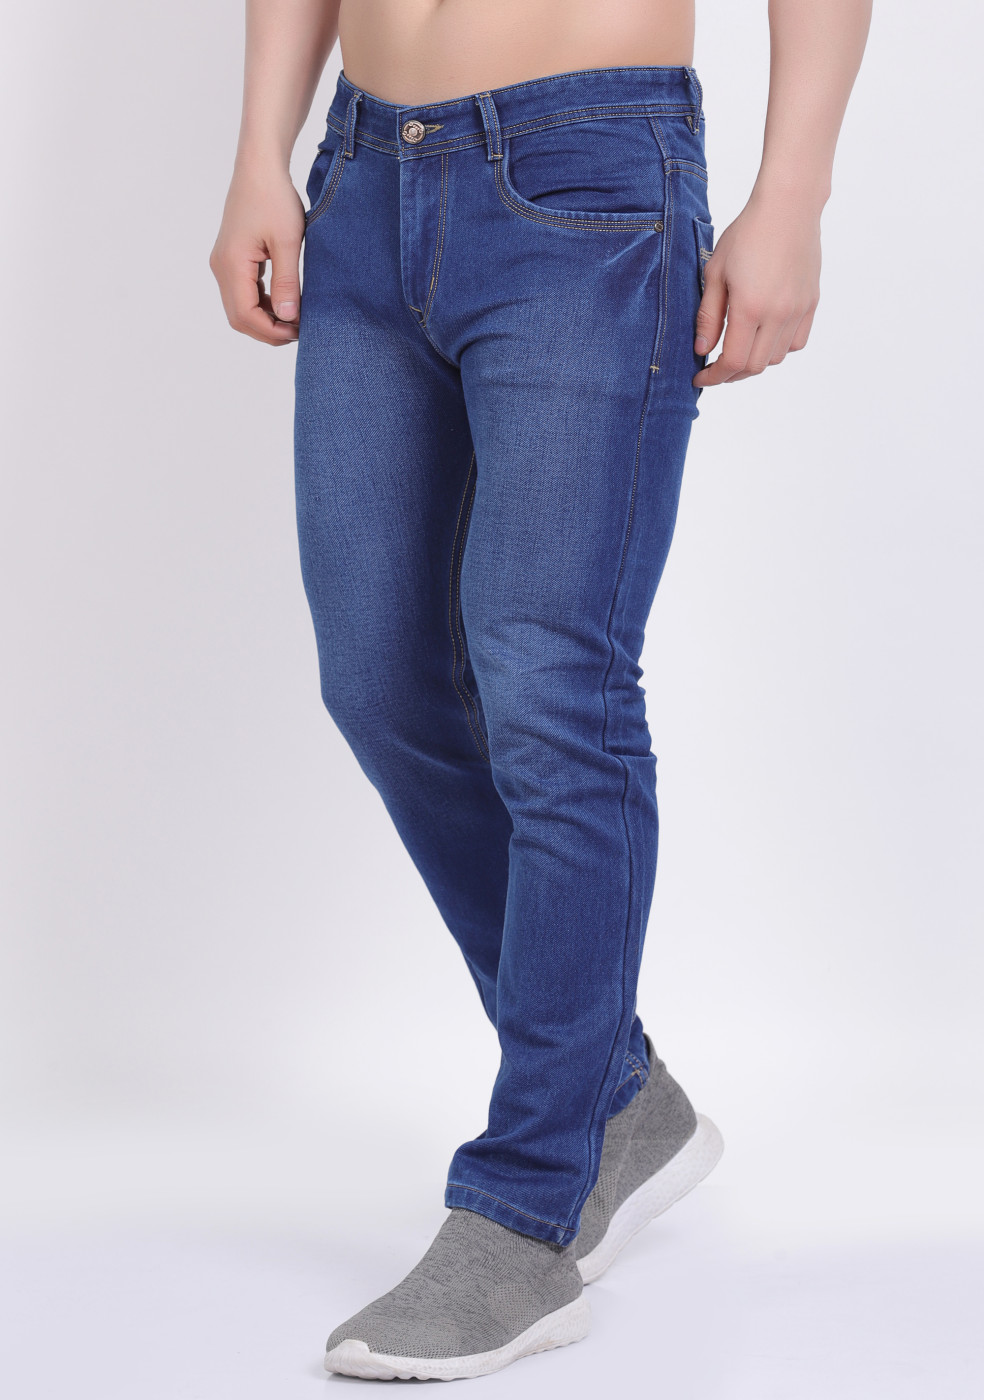 Skin Fit Men Black Plain Cotton Jeans at Rs 1215/piece in Chennai | ID:  2851580851362